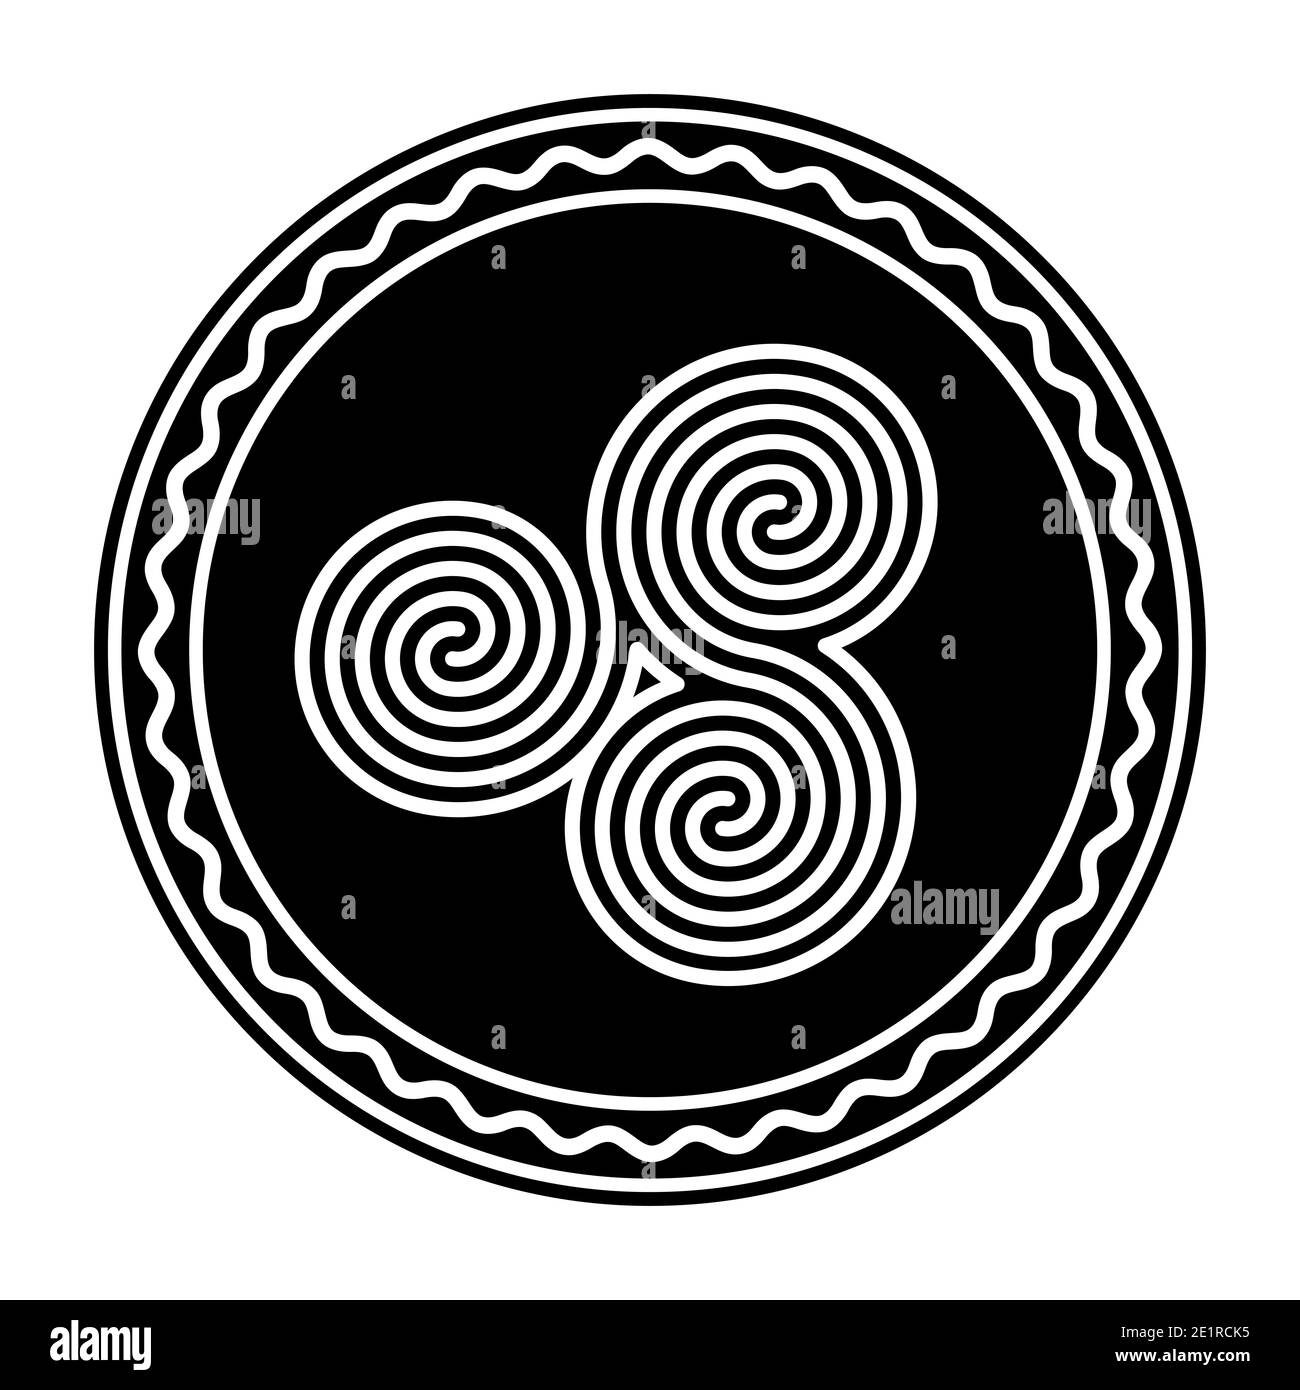 Three connected Celtic double spirals within a circle frame. Triple spiral, formed by three interlocked Archimedean spirals. Symbol and motif. Stock Photo